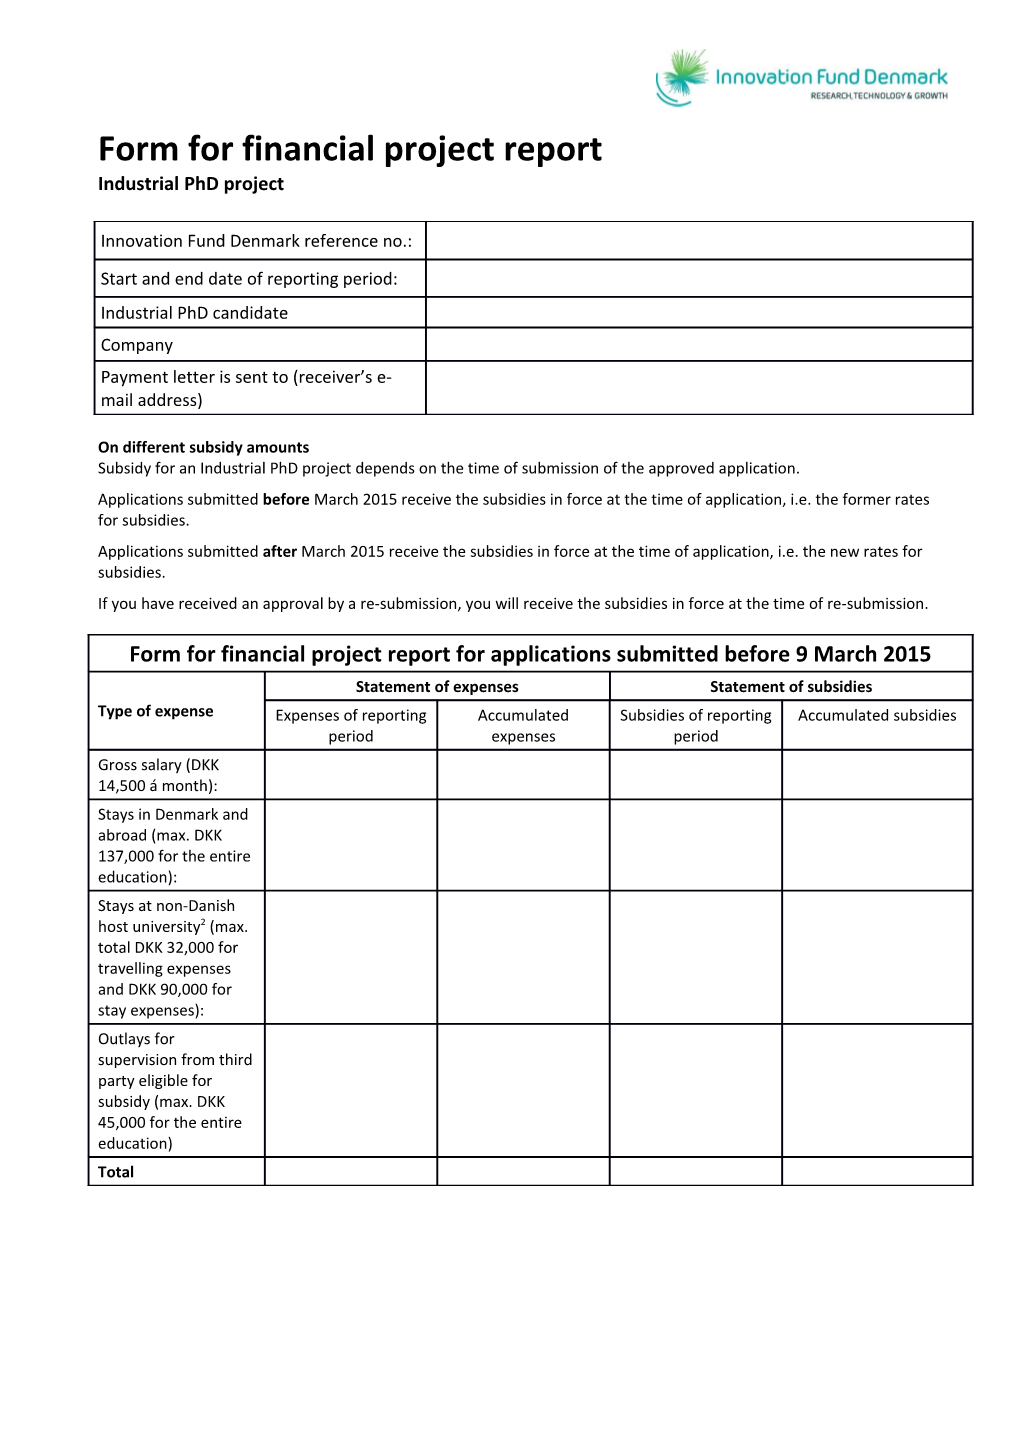 Form for Financialprojectreport